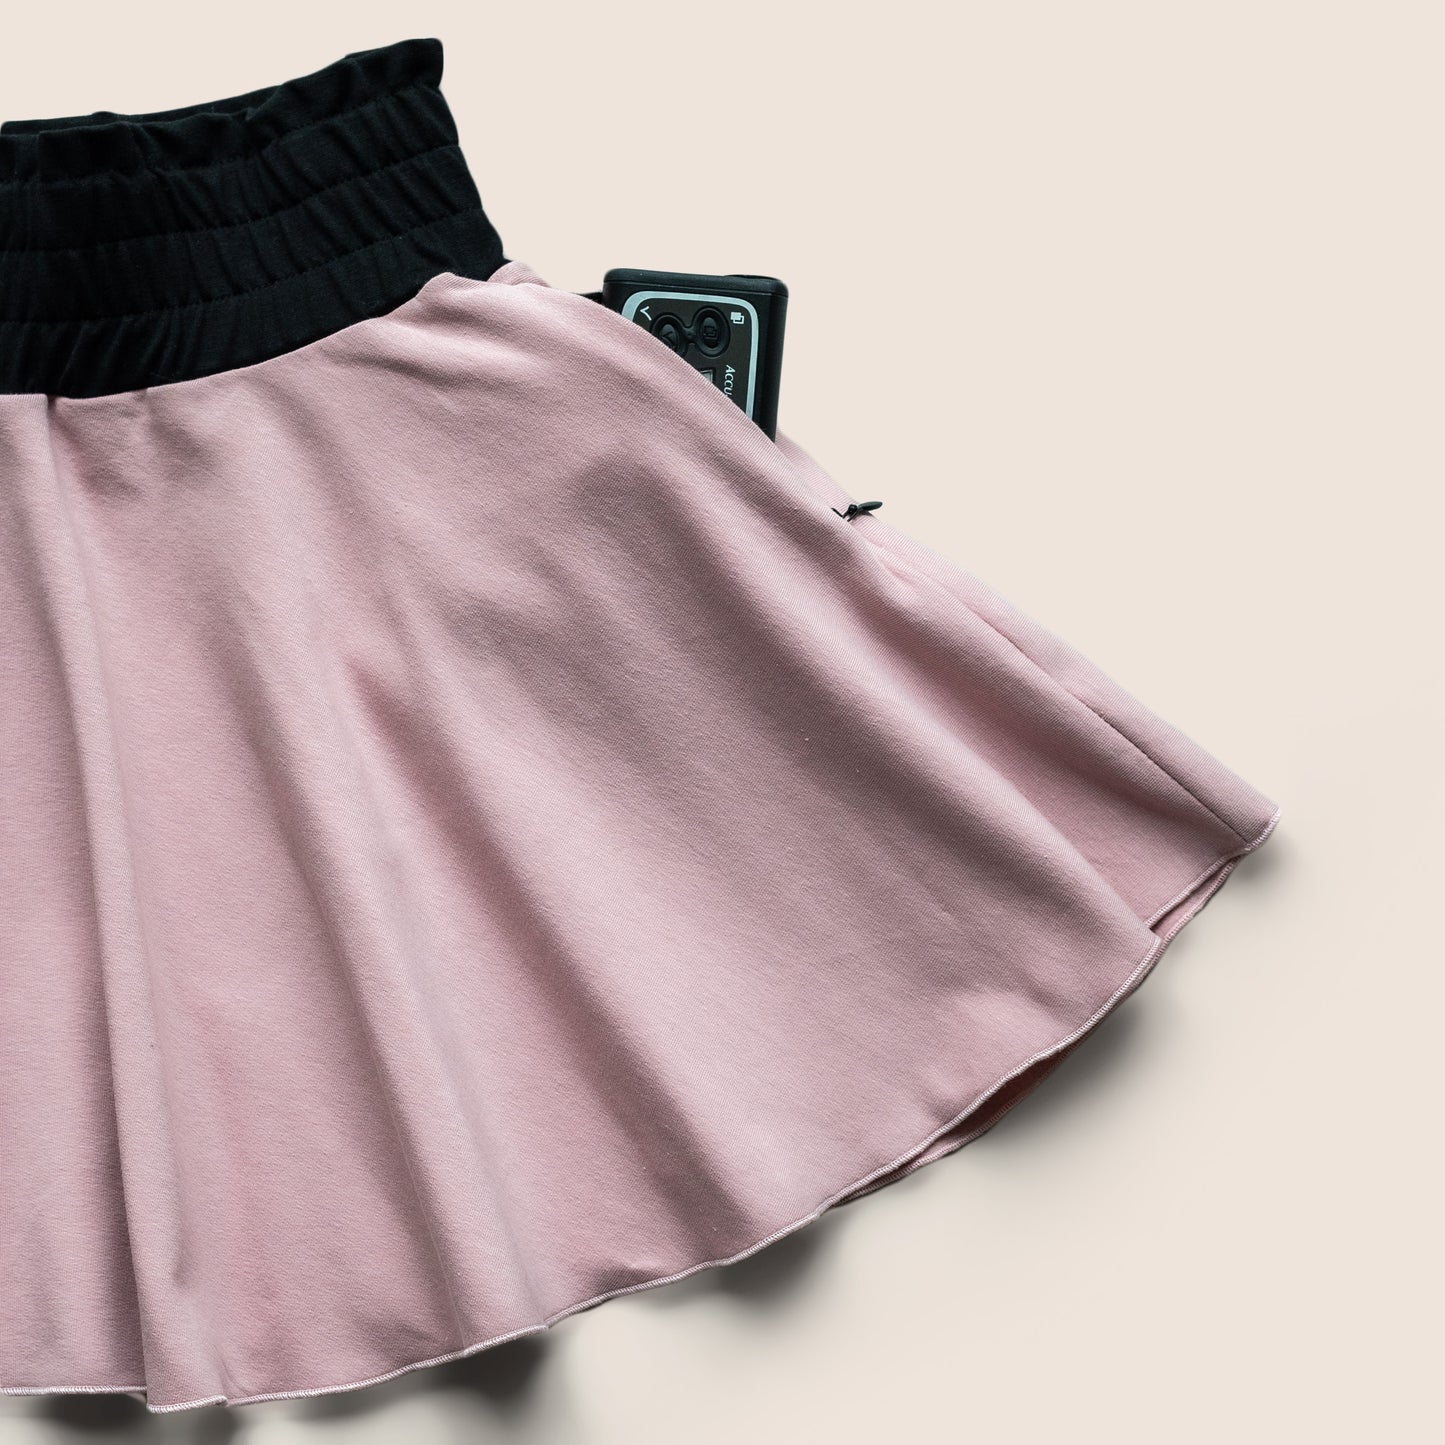 Type 1 Diabetes Clothing - Girls Skirt Ballet Pink with pockets | Our Pocket Hero